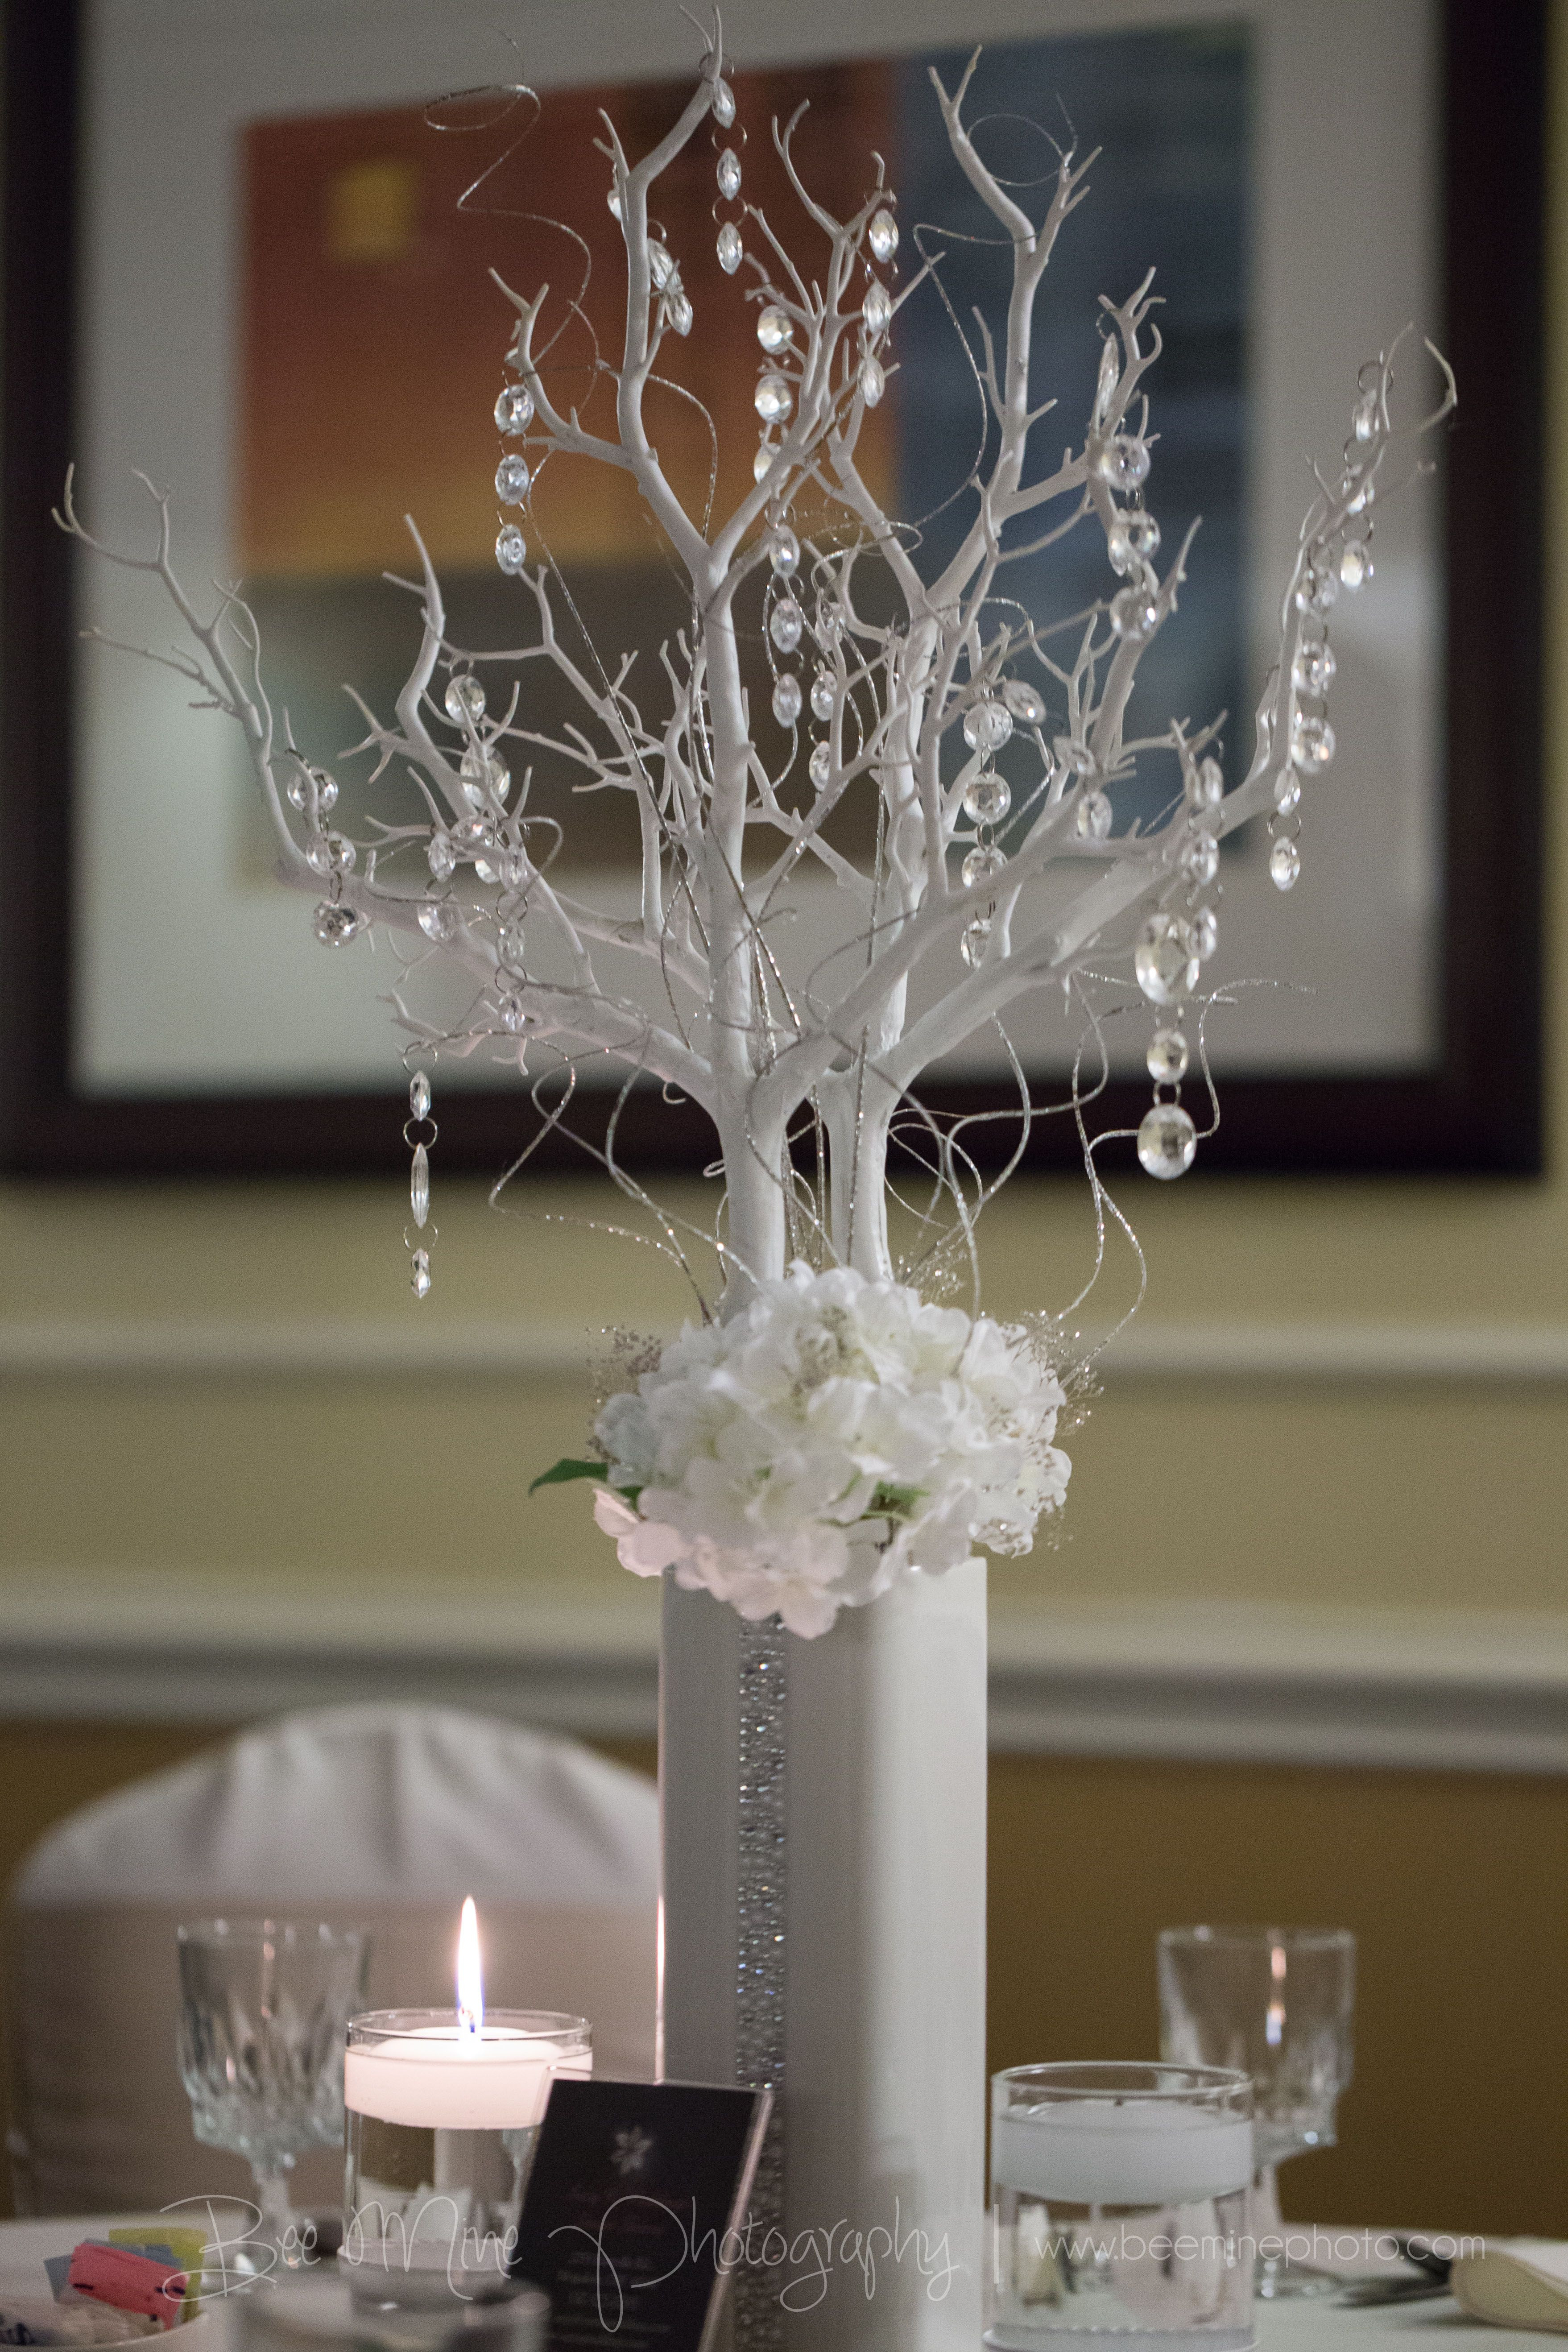 white twigs for vases of decorative twig tree new dollar tree wedding decorations awesome h intended for decorative twig tree new dollar tree wedding decorations awesome h vases dollar vase i 0d